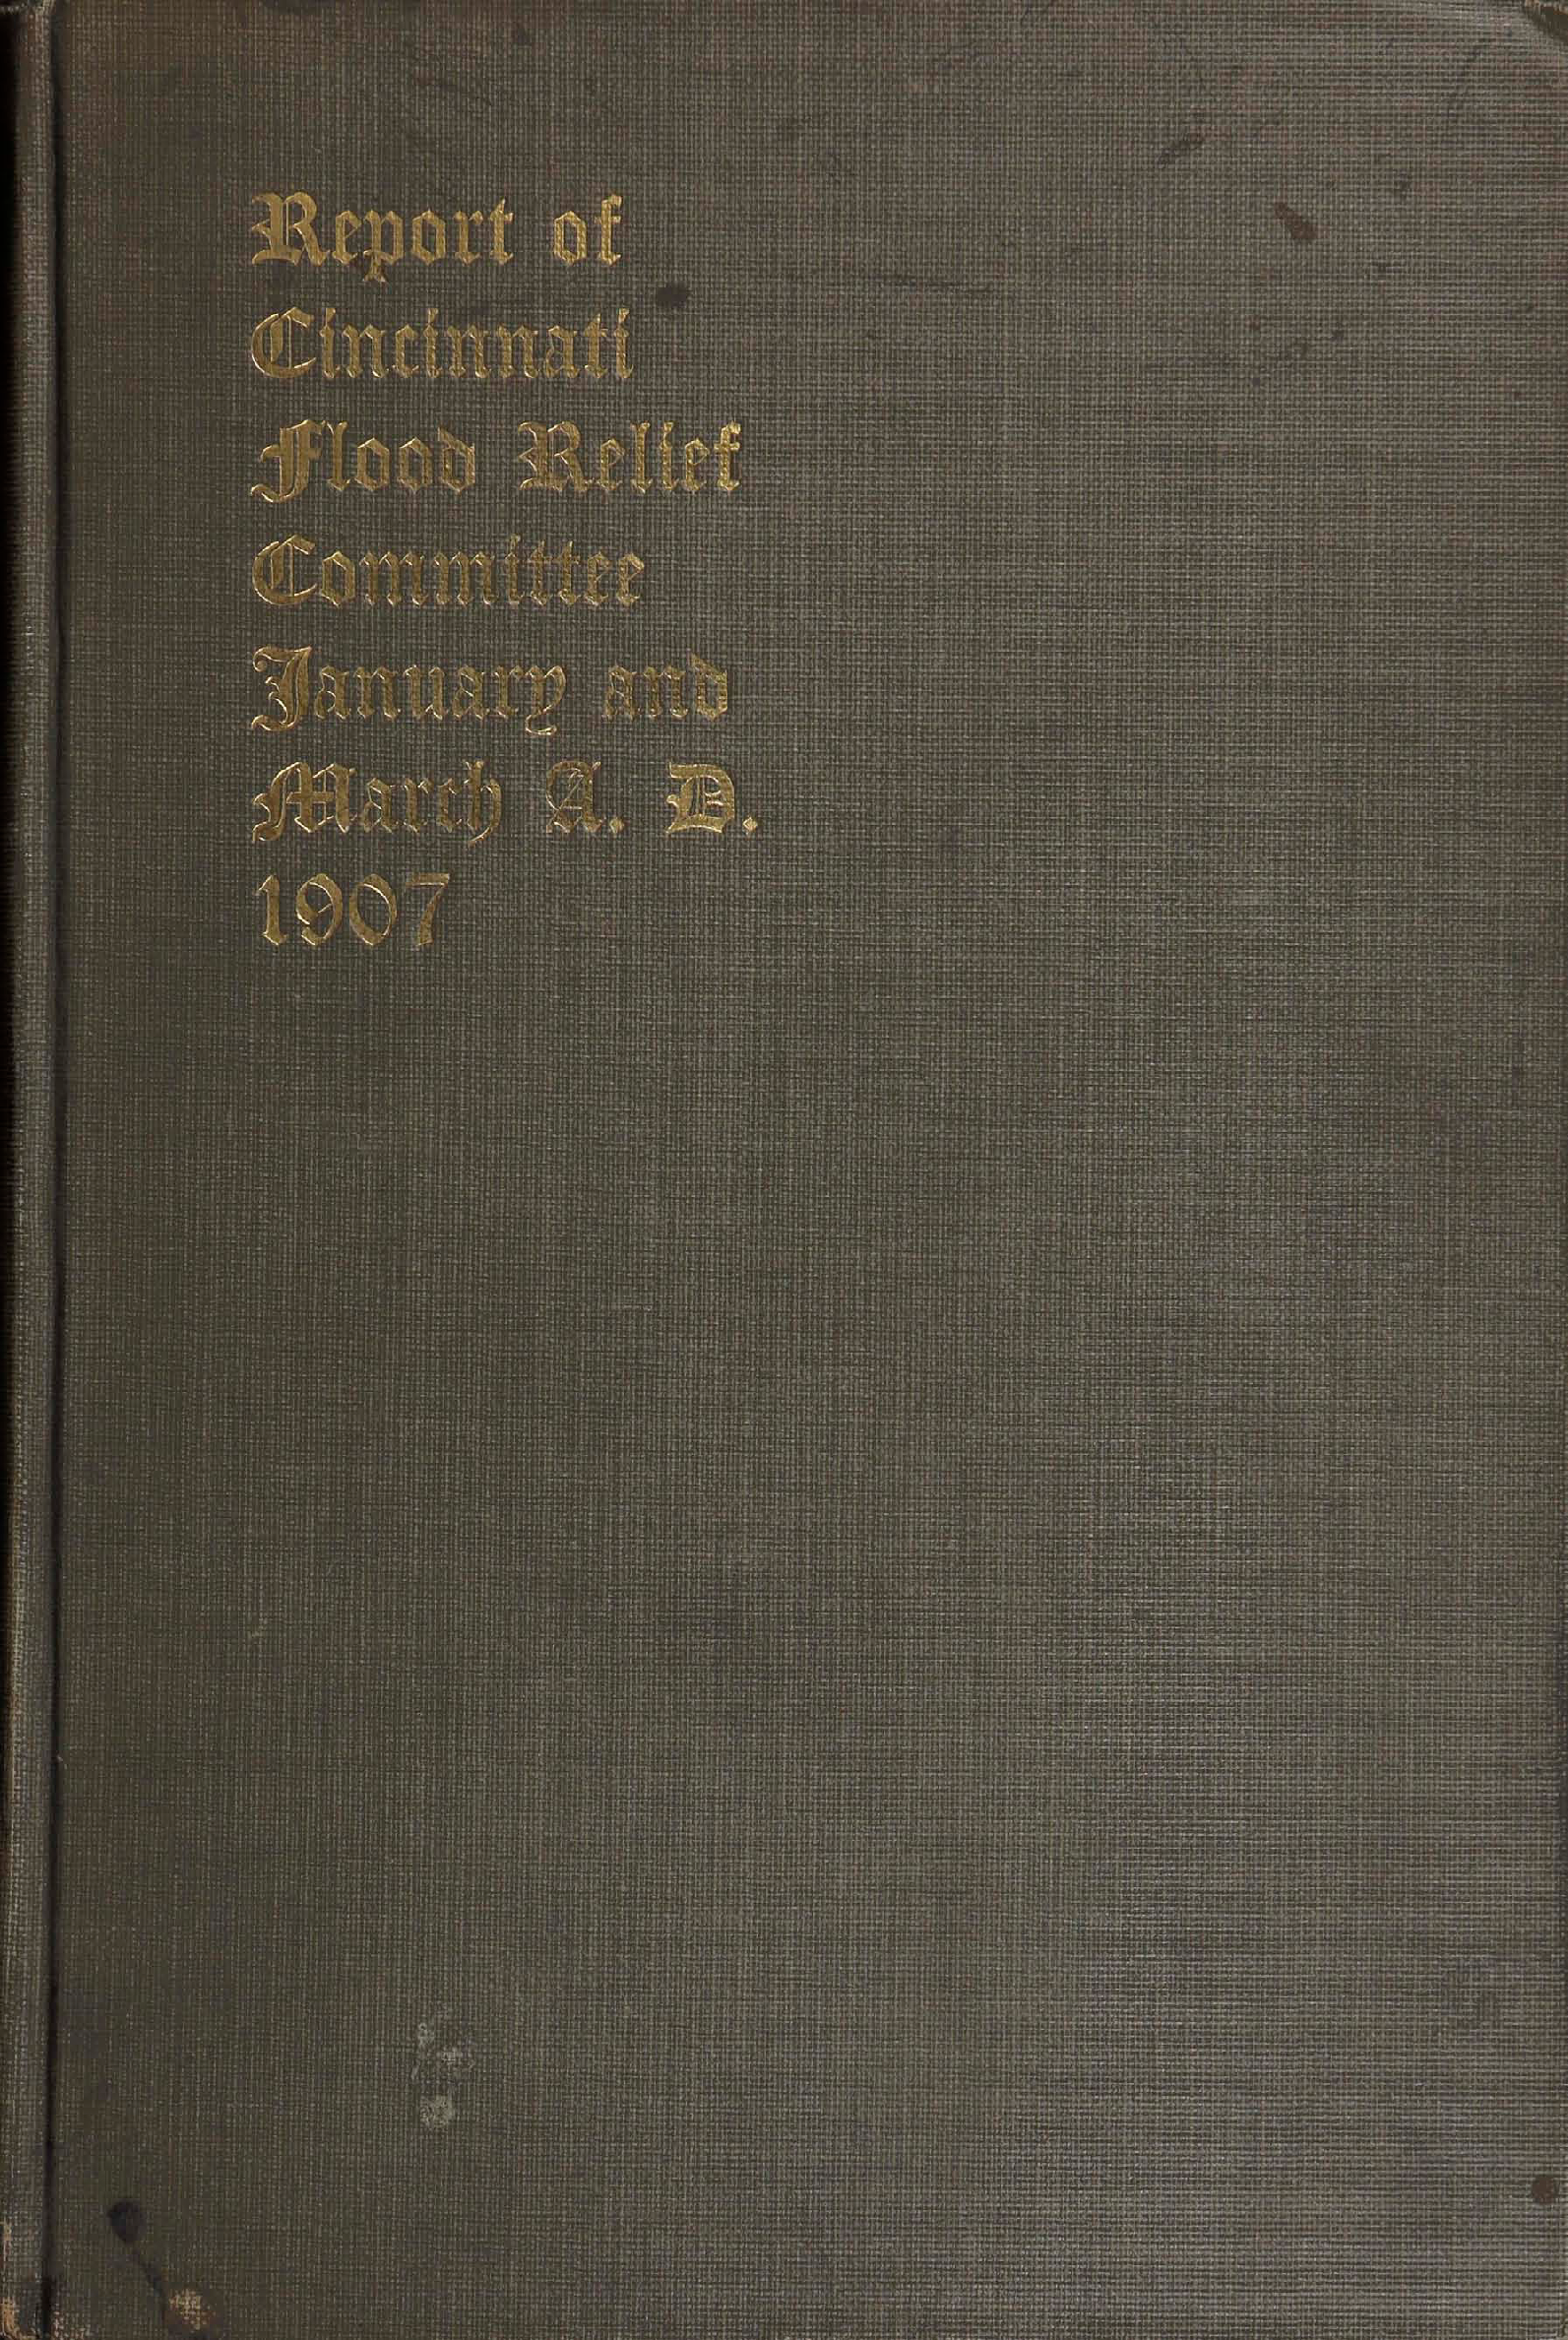 Report of Cincinnati Flood relief committee, January and March, A.D. 1907 Preview